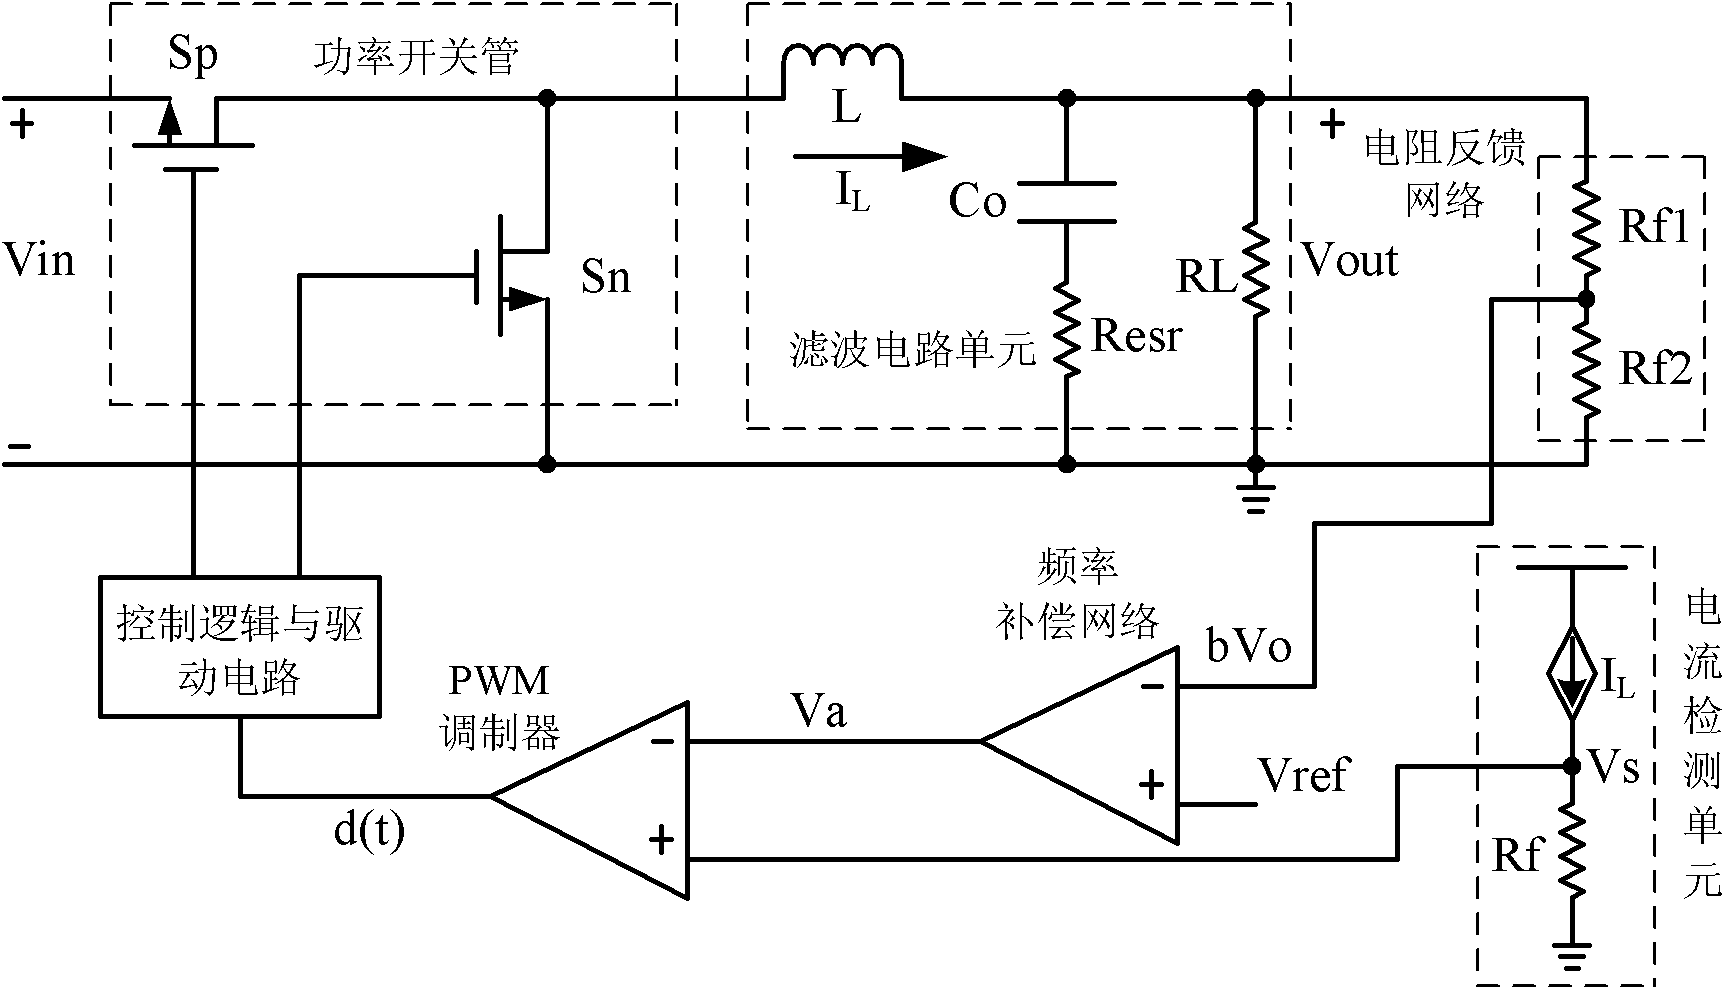 Current model frequency compensating device of DC-DC (direct current-direct current) converter